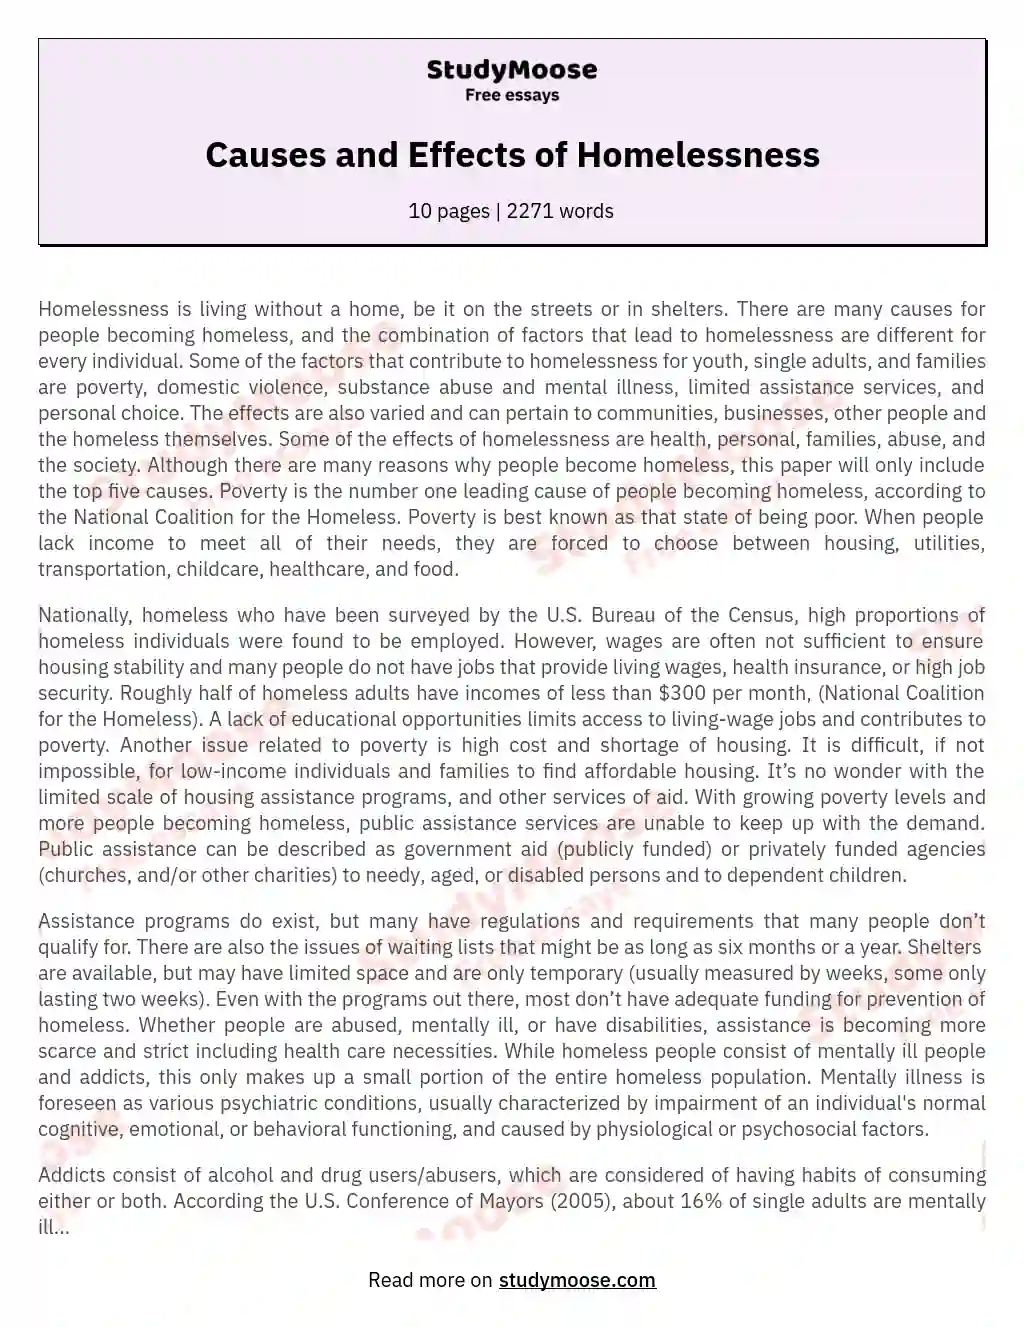 Causes and Effects of Homelessness essay